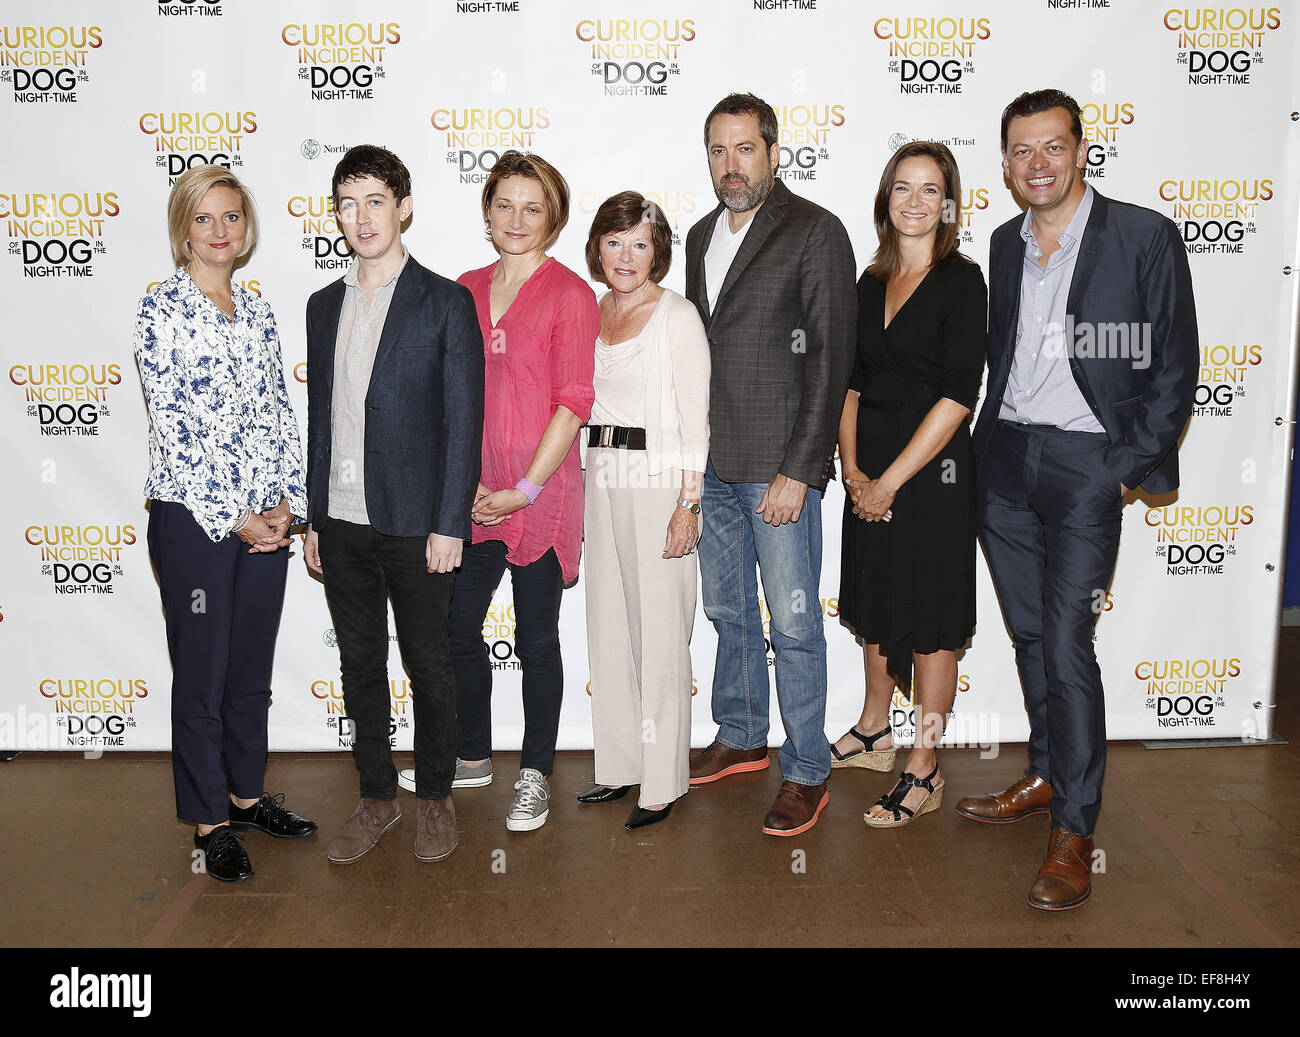 Meet and greet with the cast and creative team of the National Theatre production of The Curious Incident of the Dog in the Night-Time at the New 42nd Street Studios.  Featuring: Marianne Elliott,Alexander Sharp,Francesca Faridany,Helen Carey,Ian Barford, Stock Photo